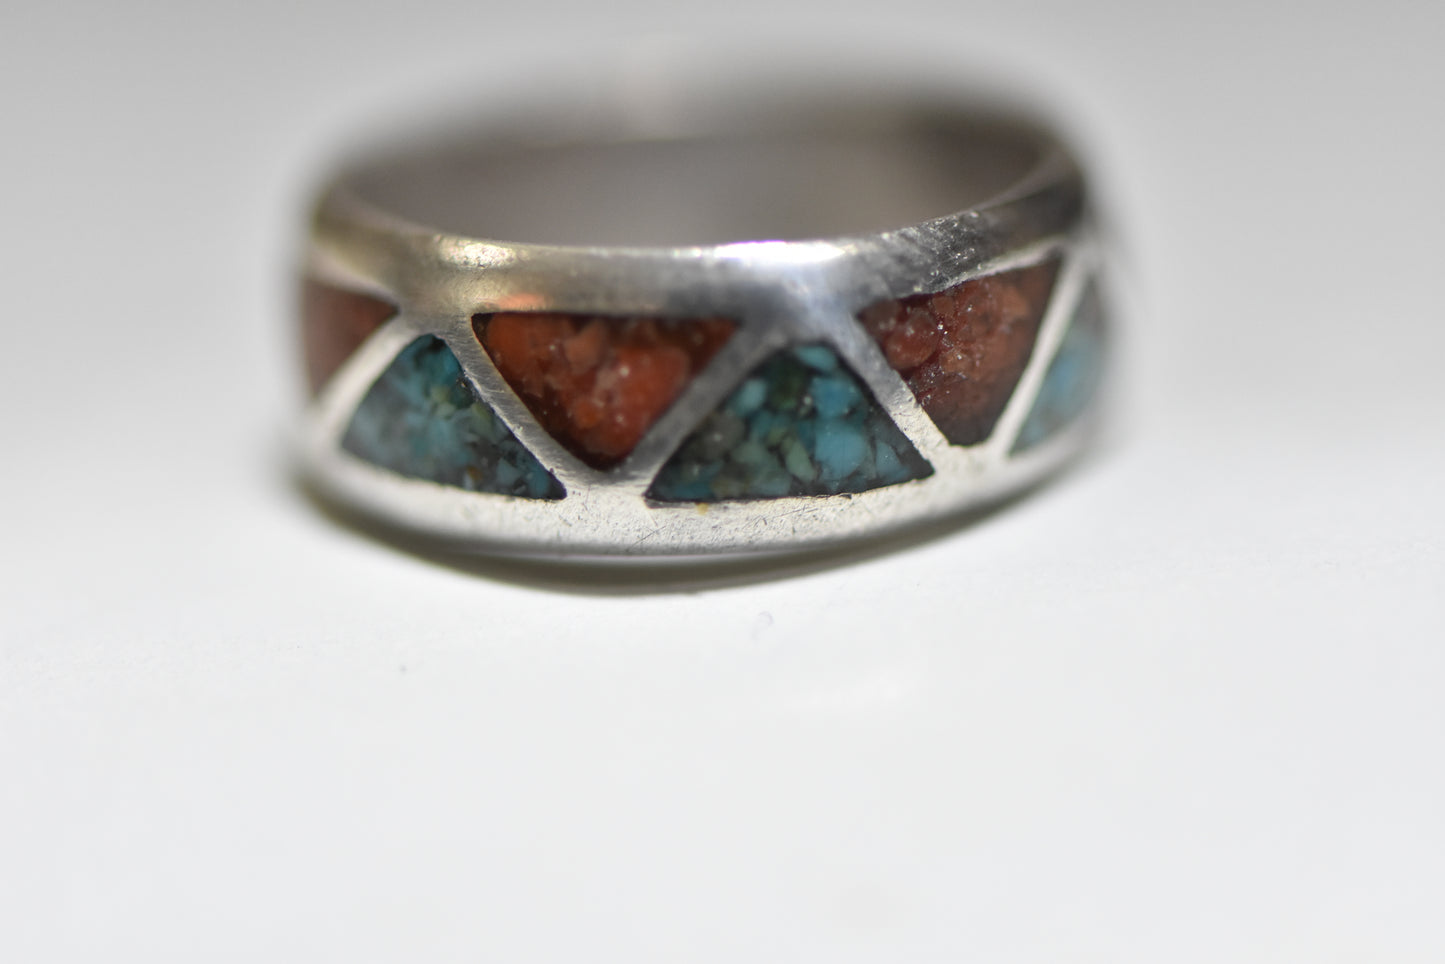 Turquoise ring coral chips band sterling silver wedding vintage southwest women